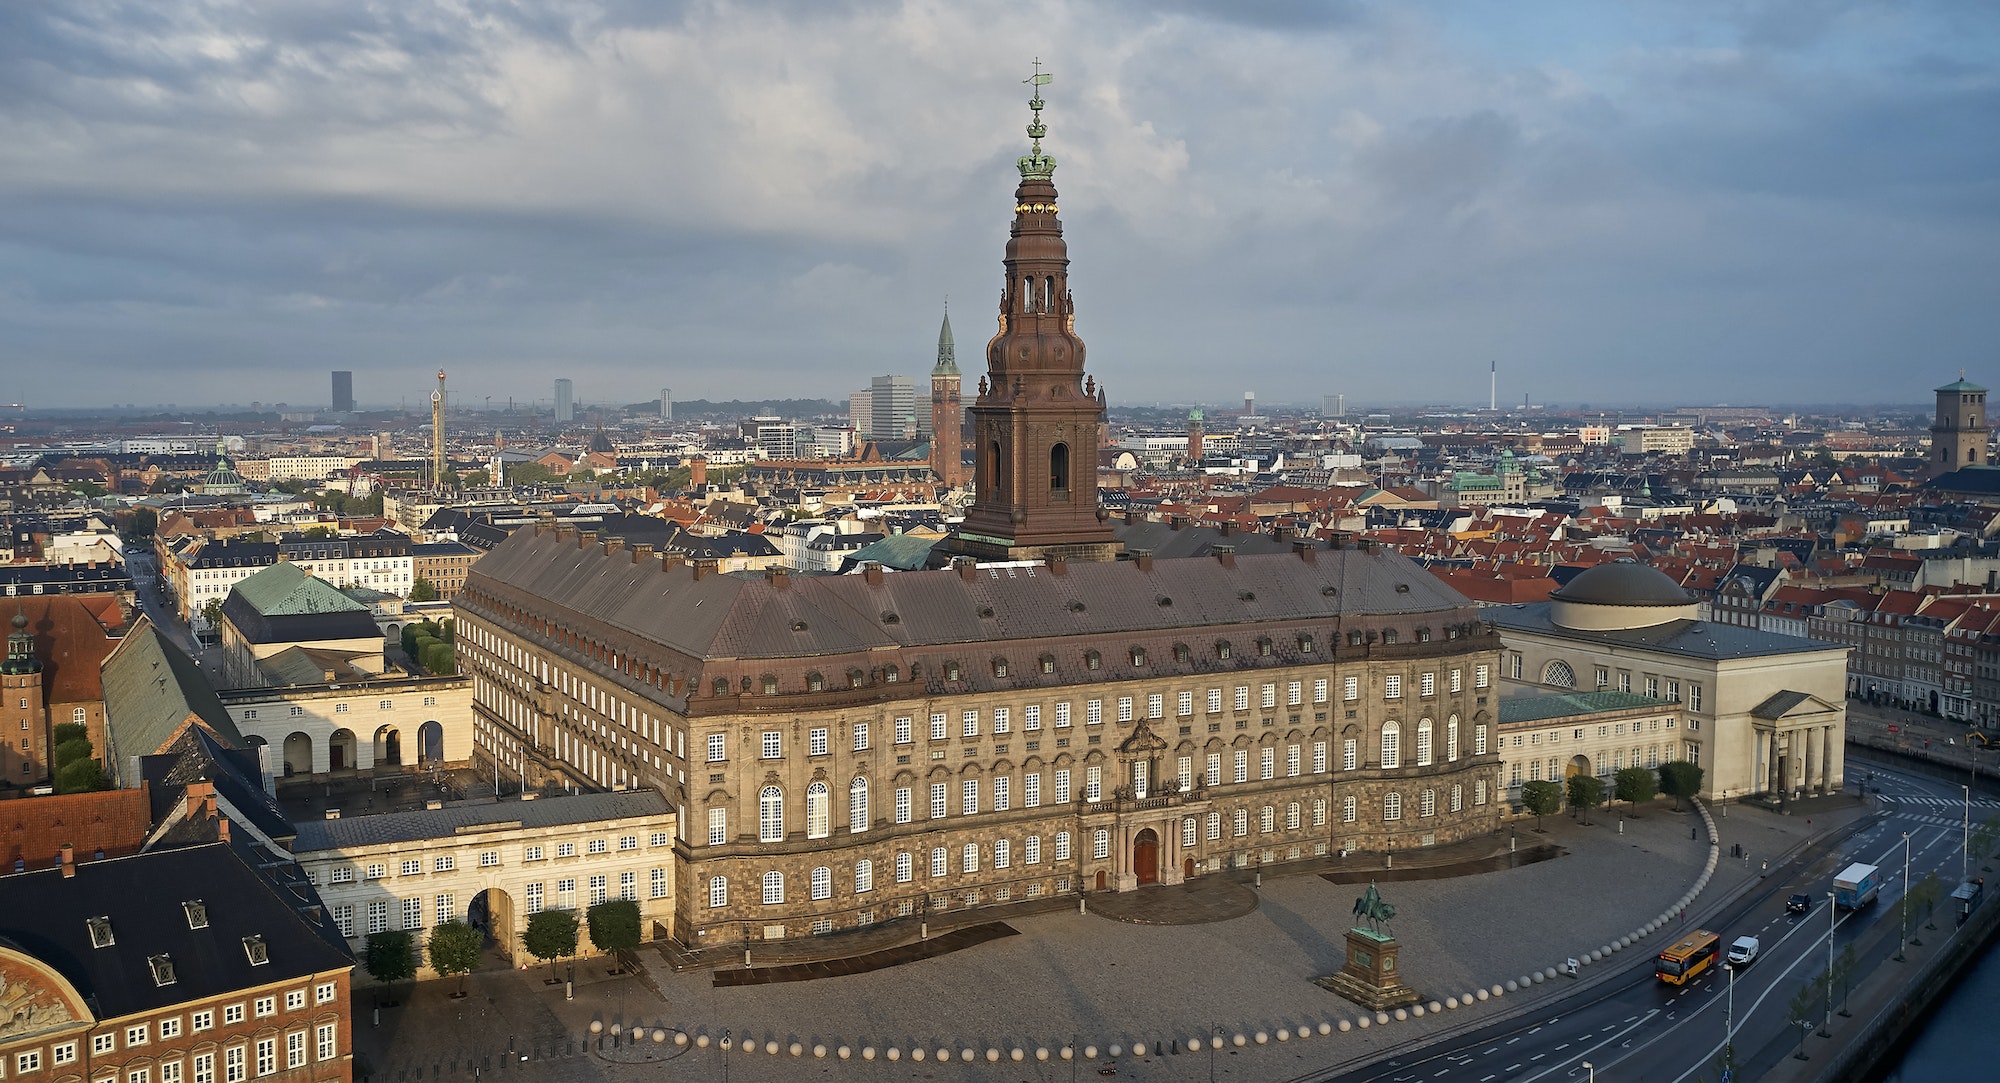 Aerial view of Christiansborg Palace in morning sun, Denmark